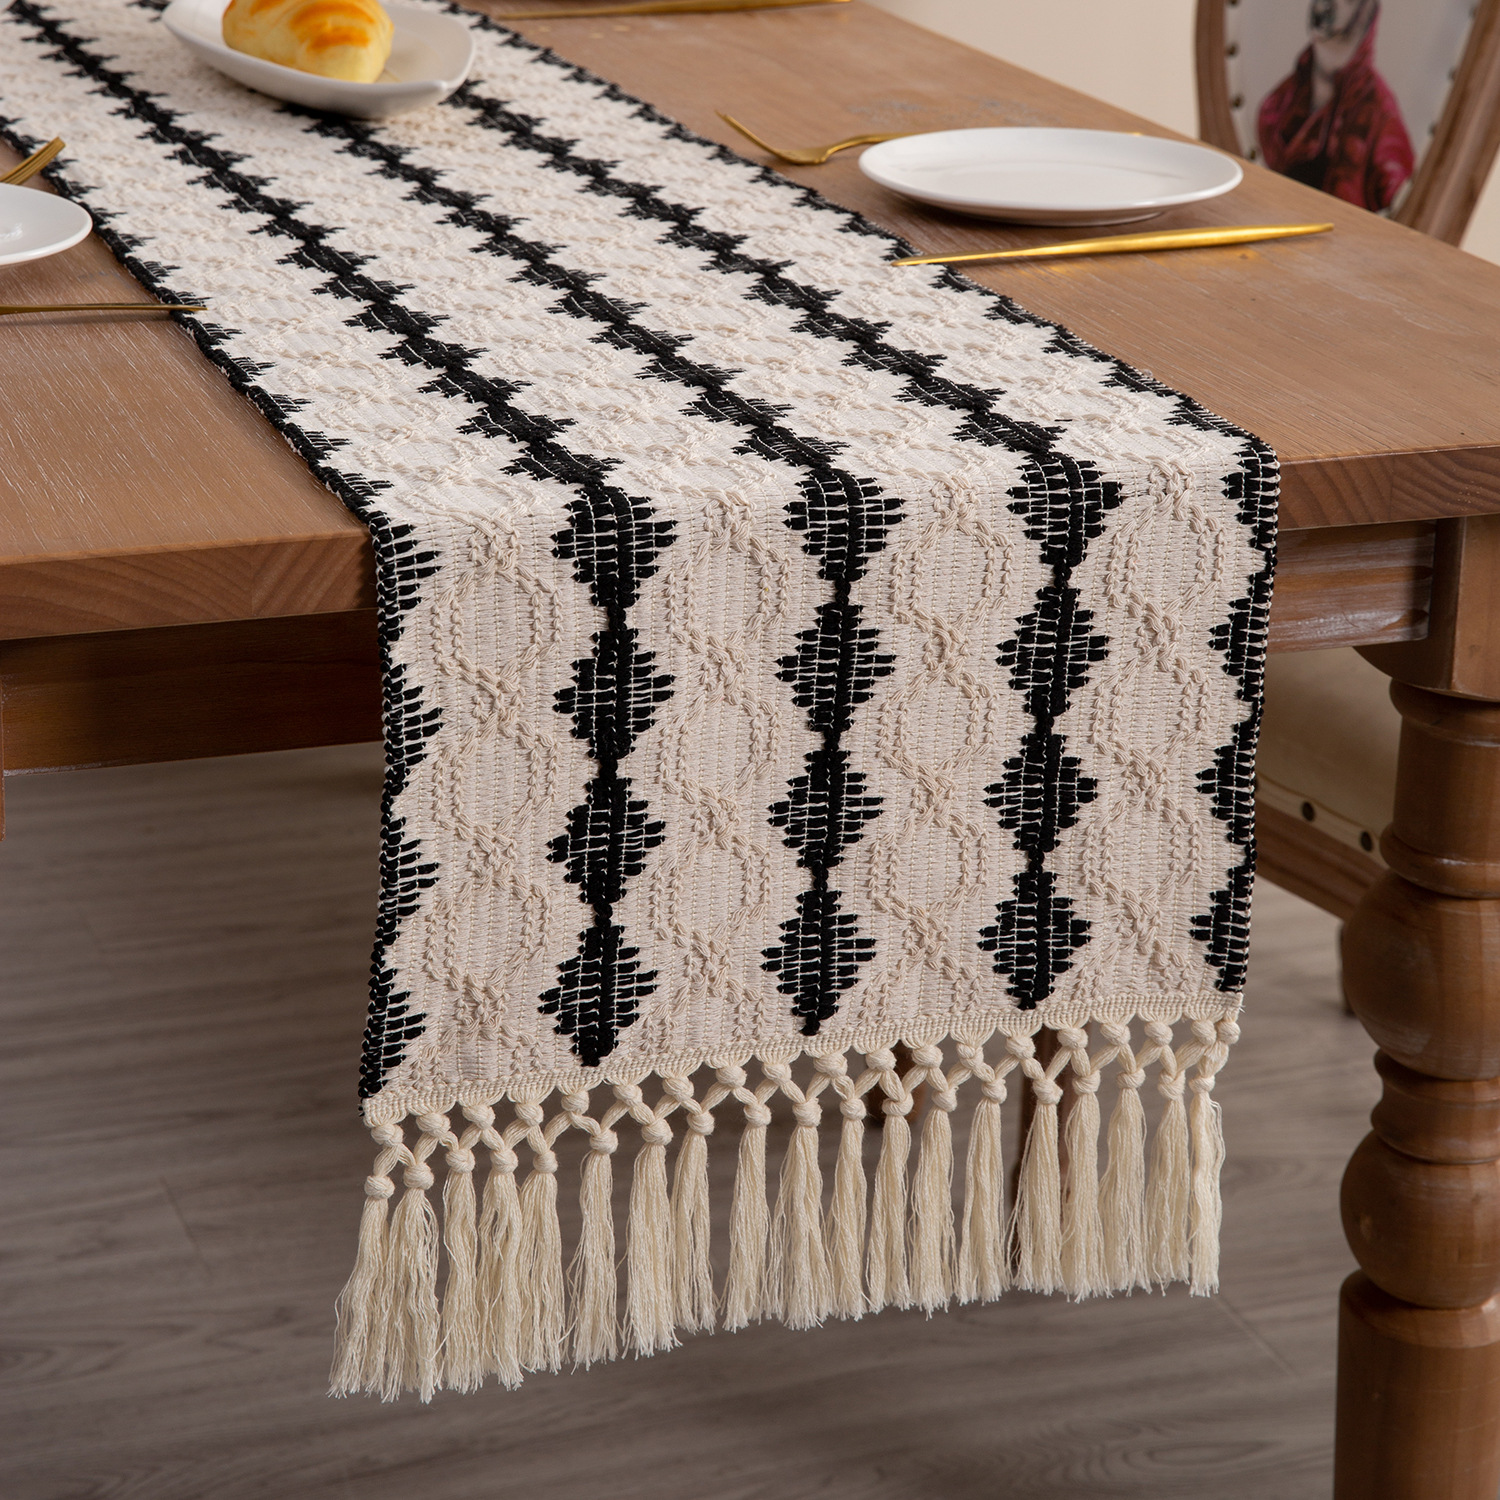 New Cotton and Linen Tassel Table Runner American Tassel Holiday Decoration Woven Dual-Color Patchwork Long Table Cloth Amazon